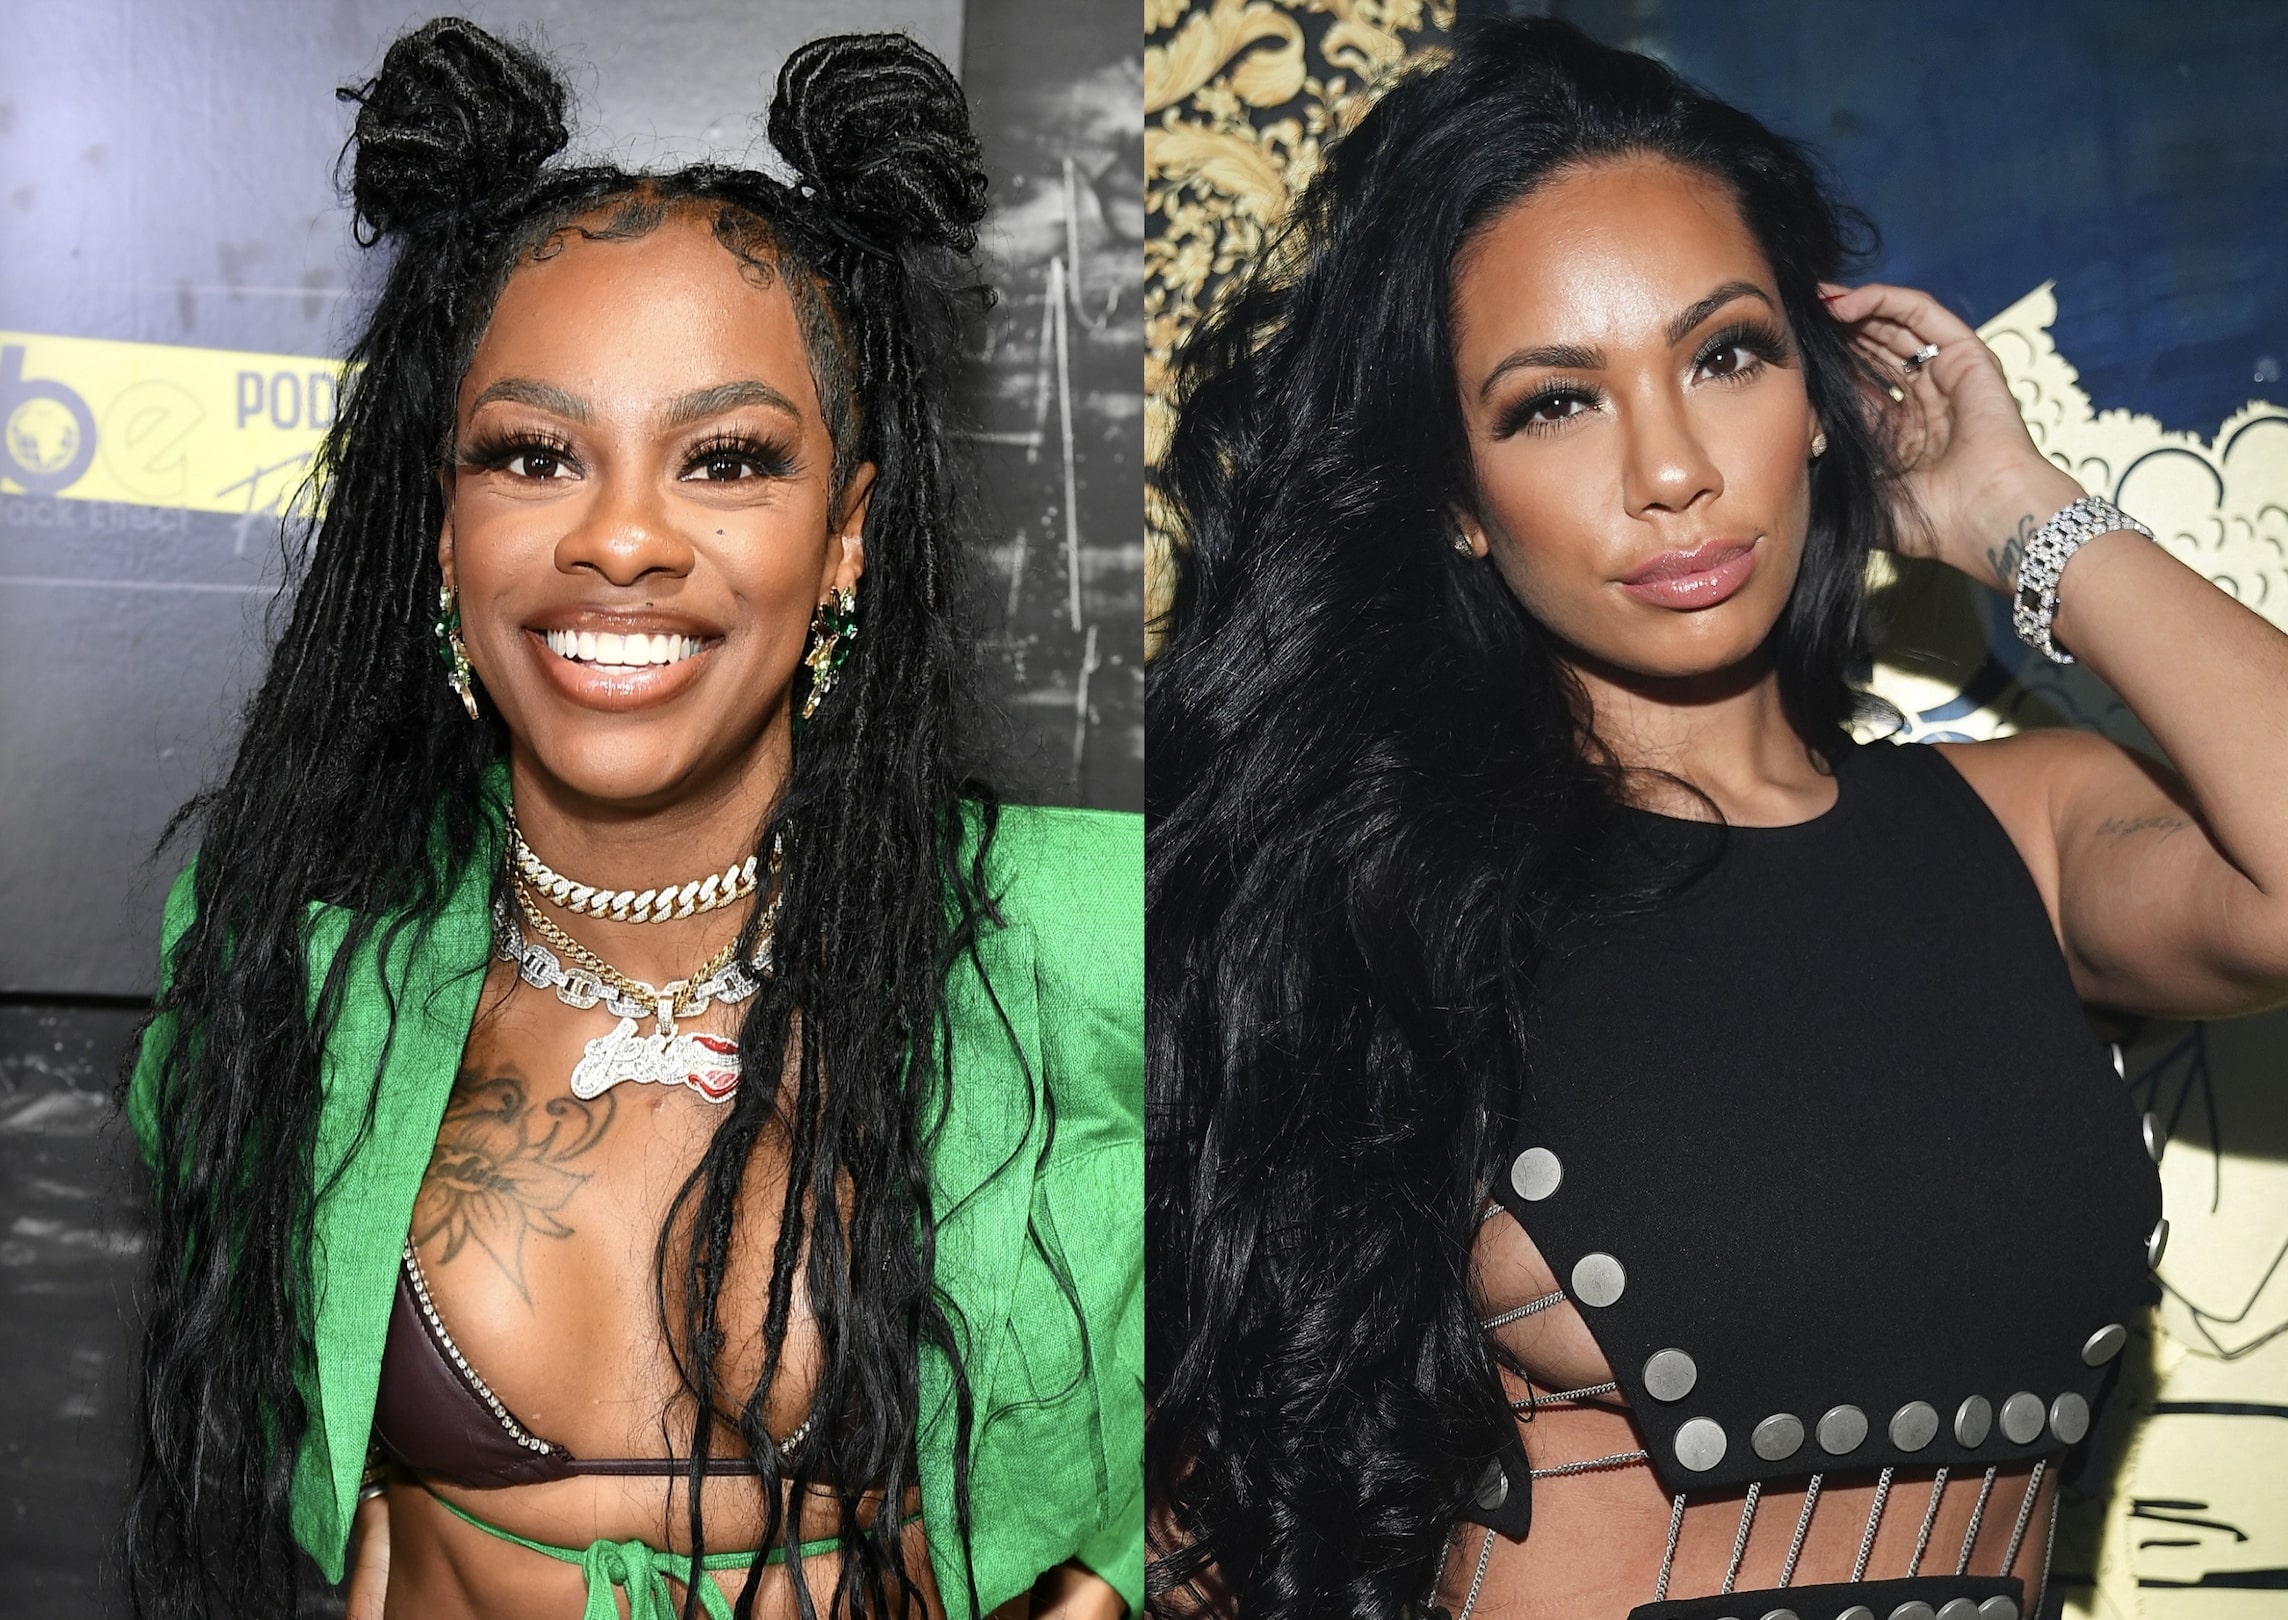 Jess Hilarious Explains Why Erica Mena’s “Monkey” Spice Diss May Not Have Been A Racial Slur